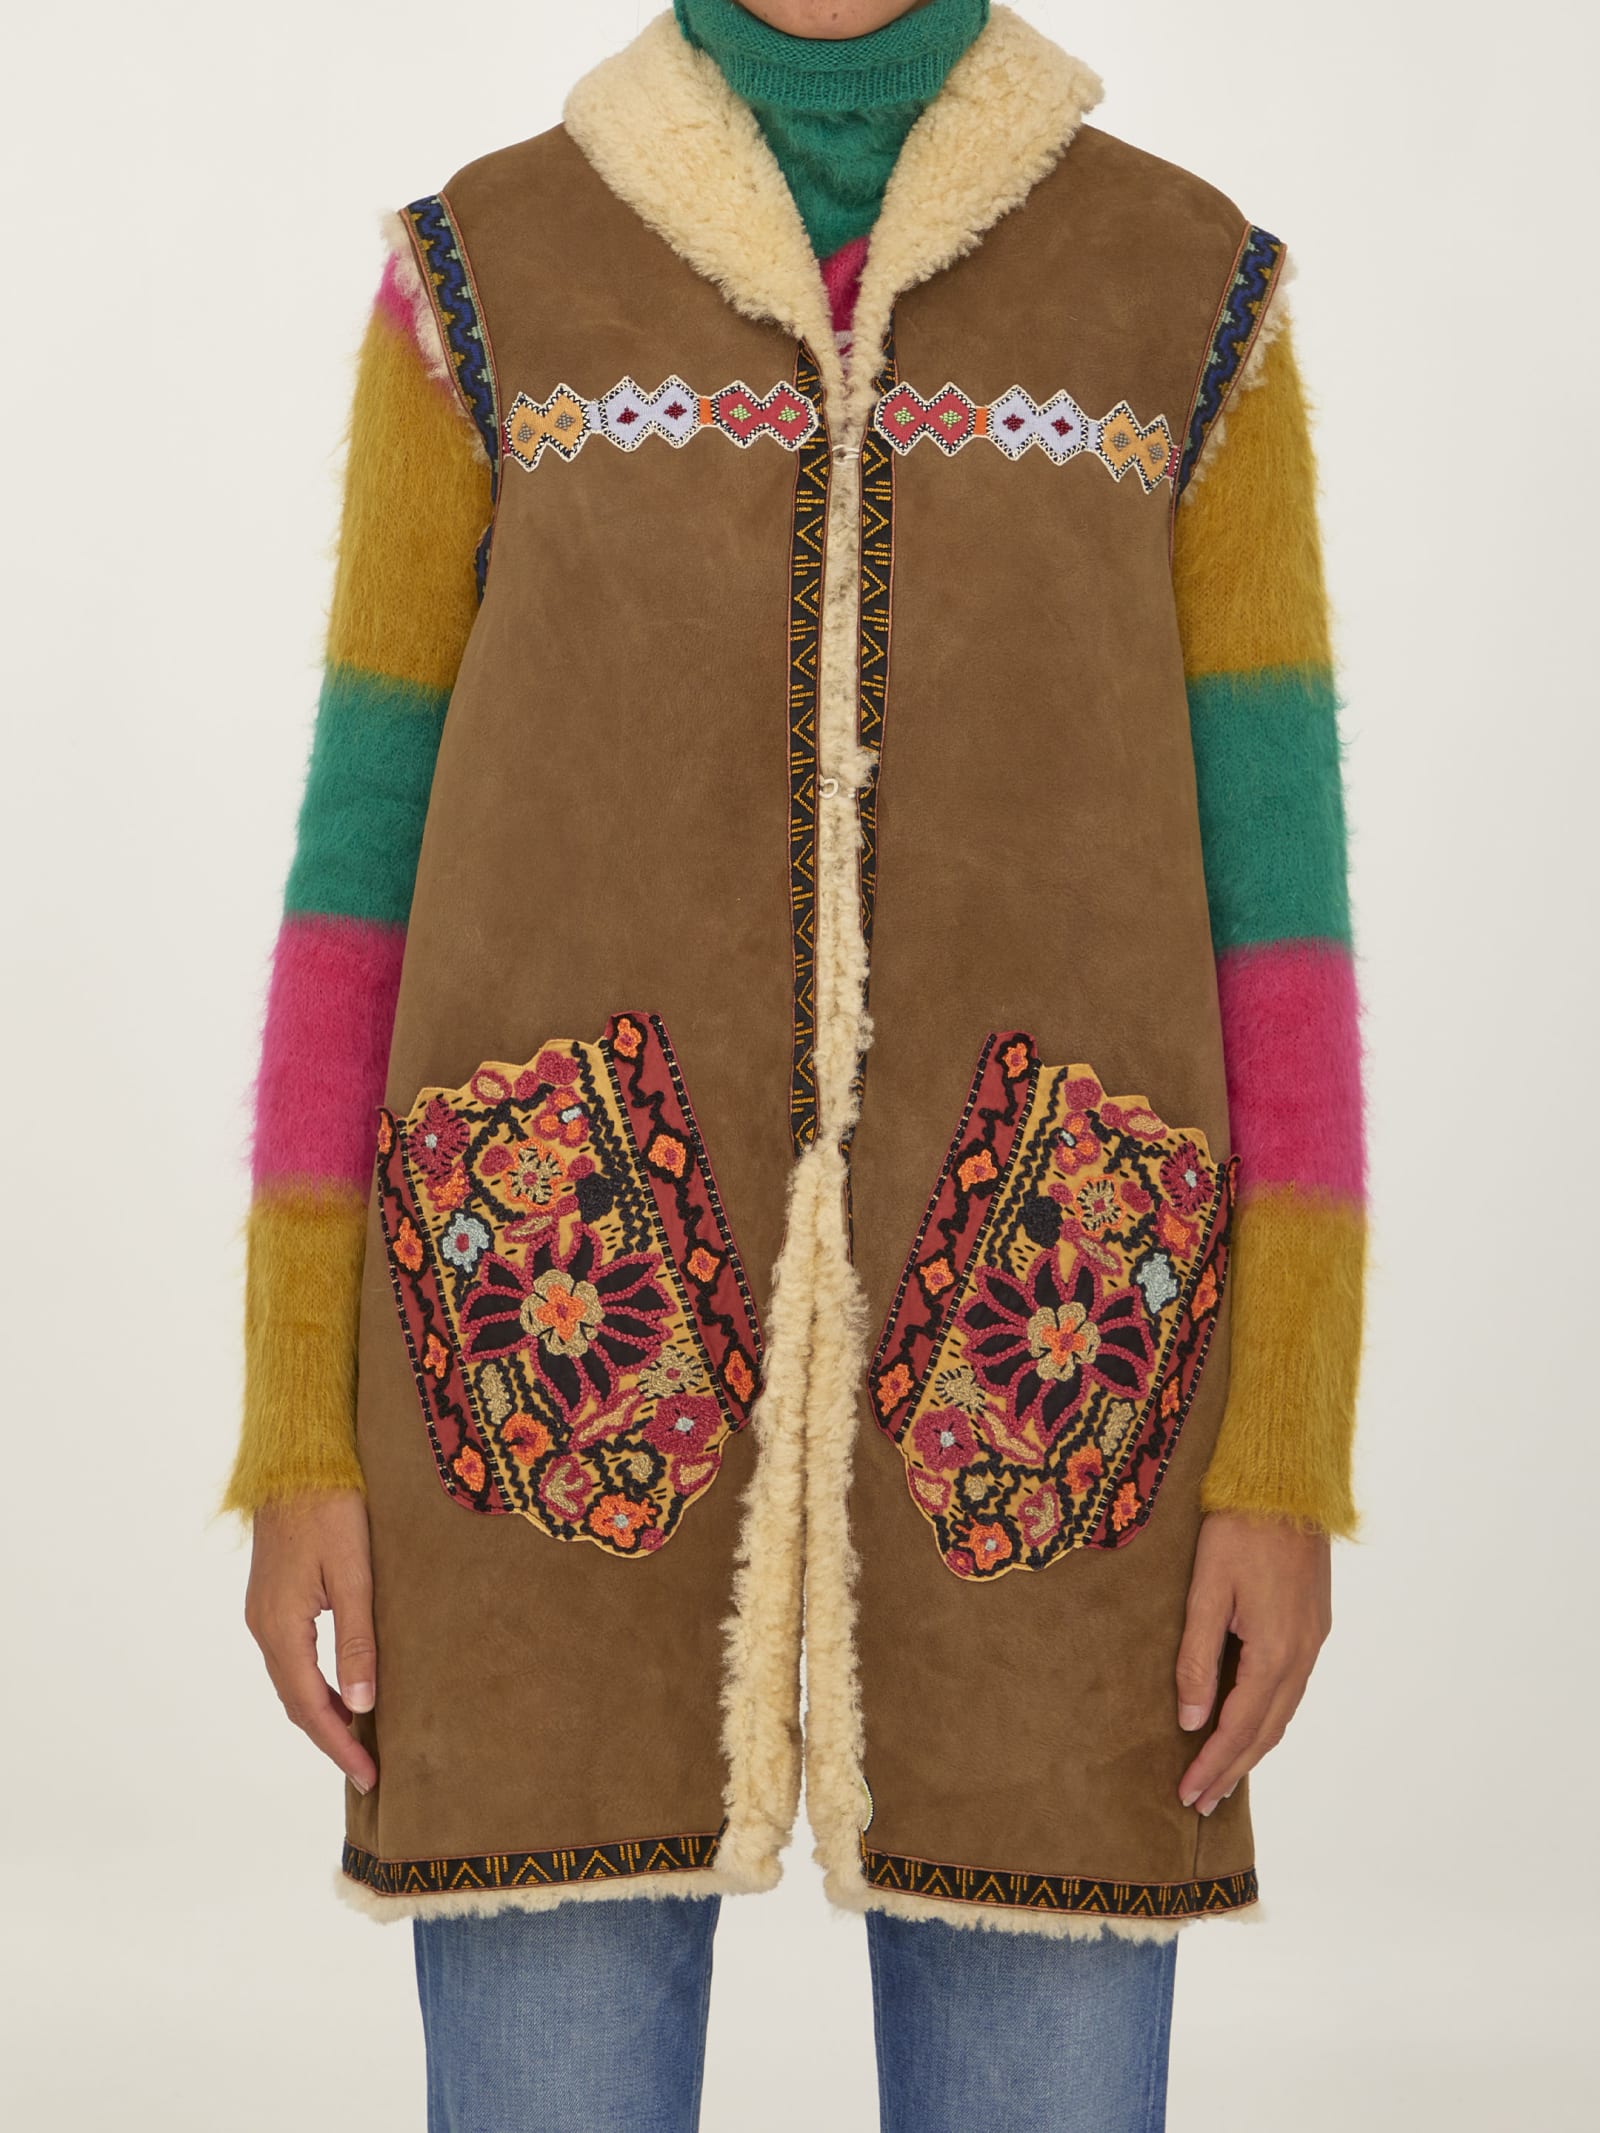 Etro Embroidered Shearling Vest